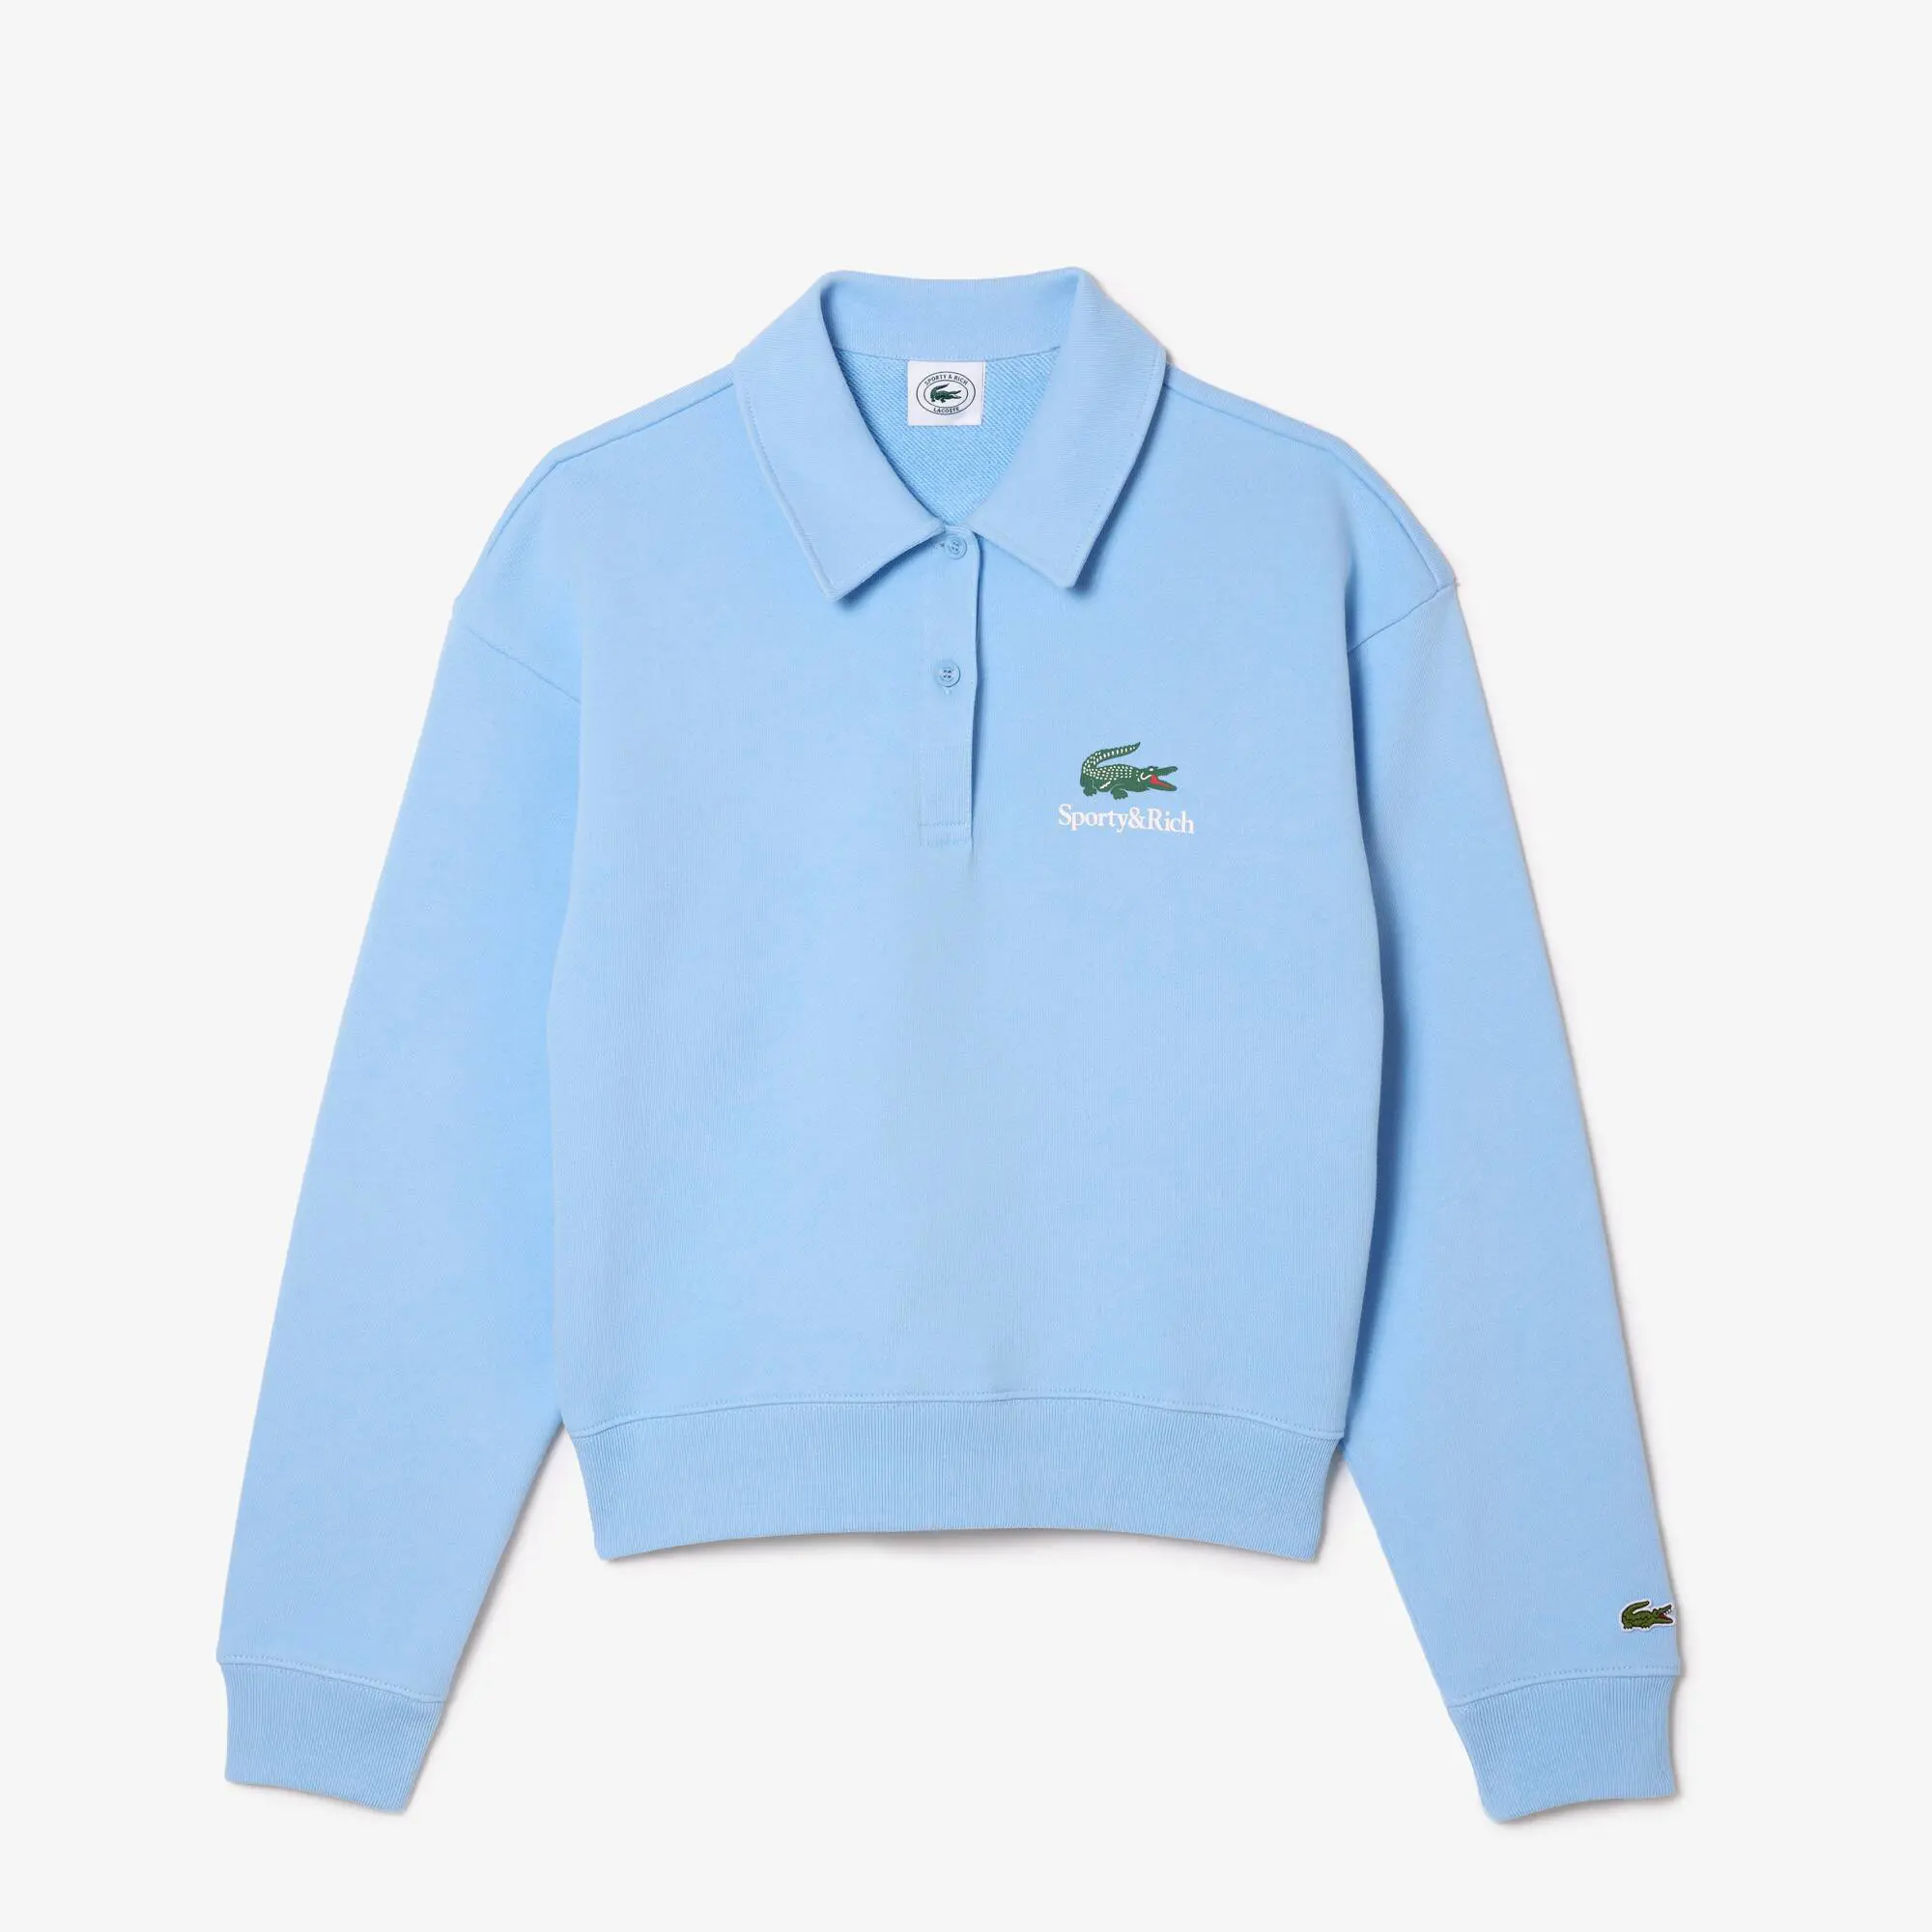 Lacoste Long Sleeve Lacoste x Sporty & Rich Polo Shirt. 2